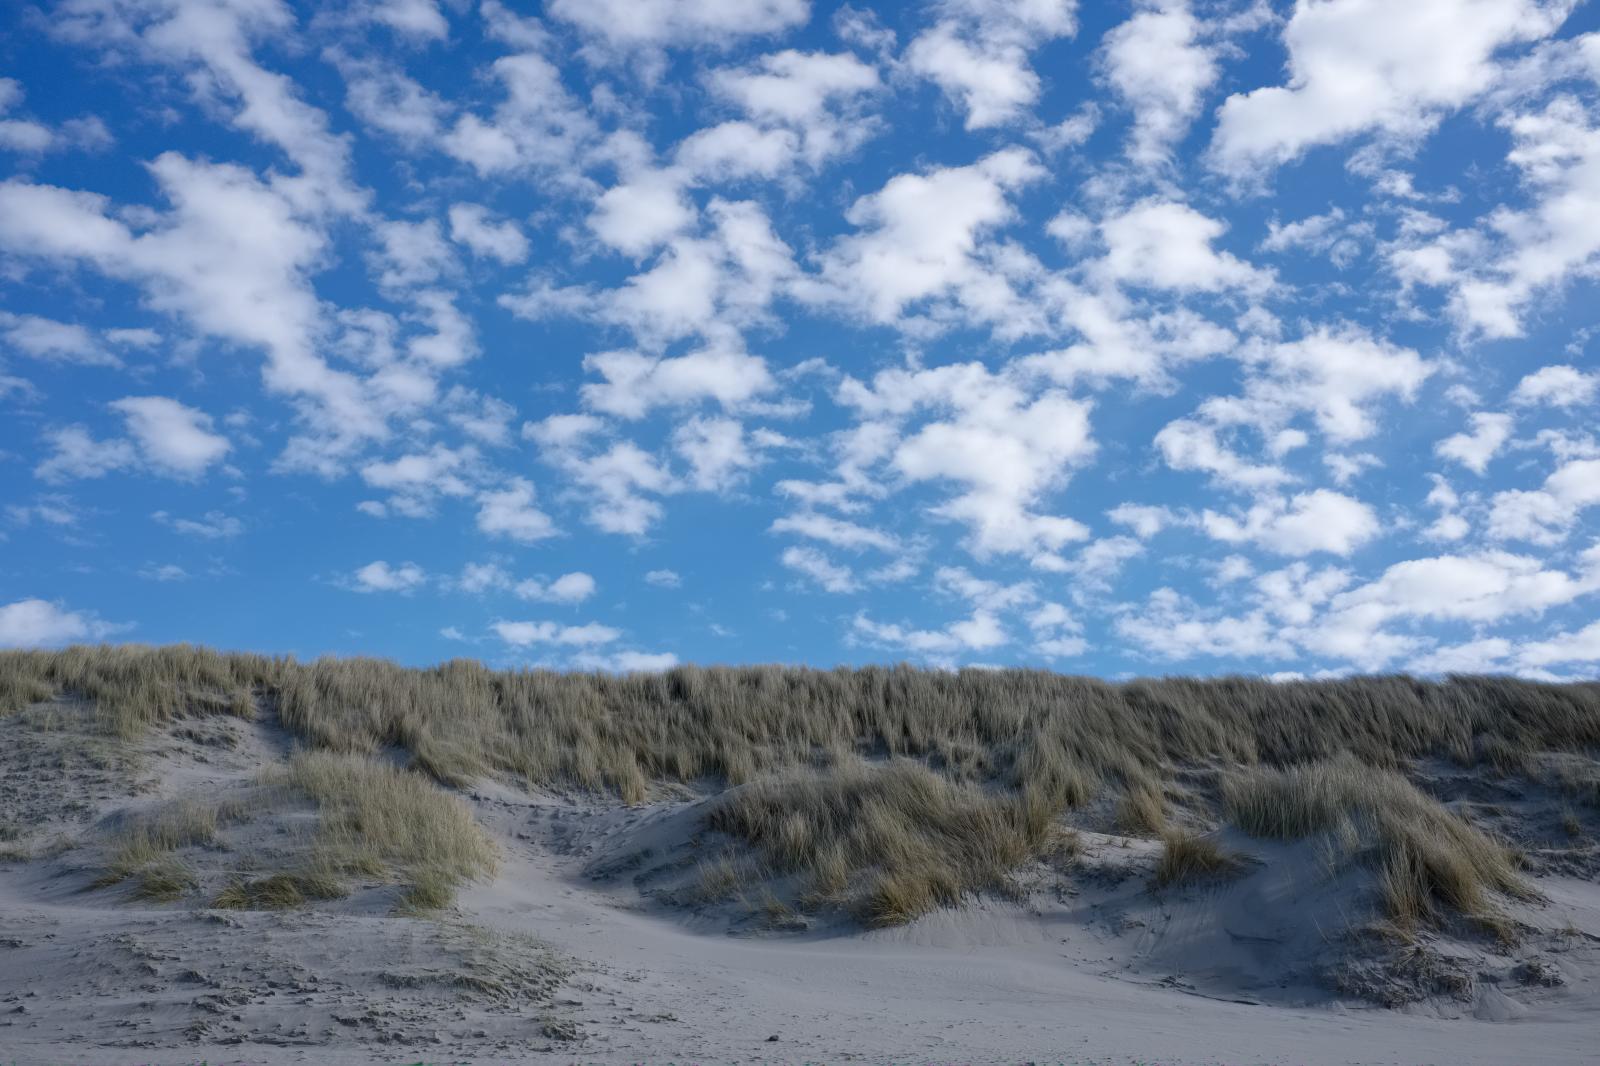 Dunes and Marram Grass | Buy this image